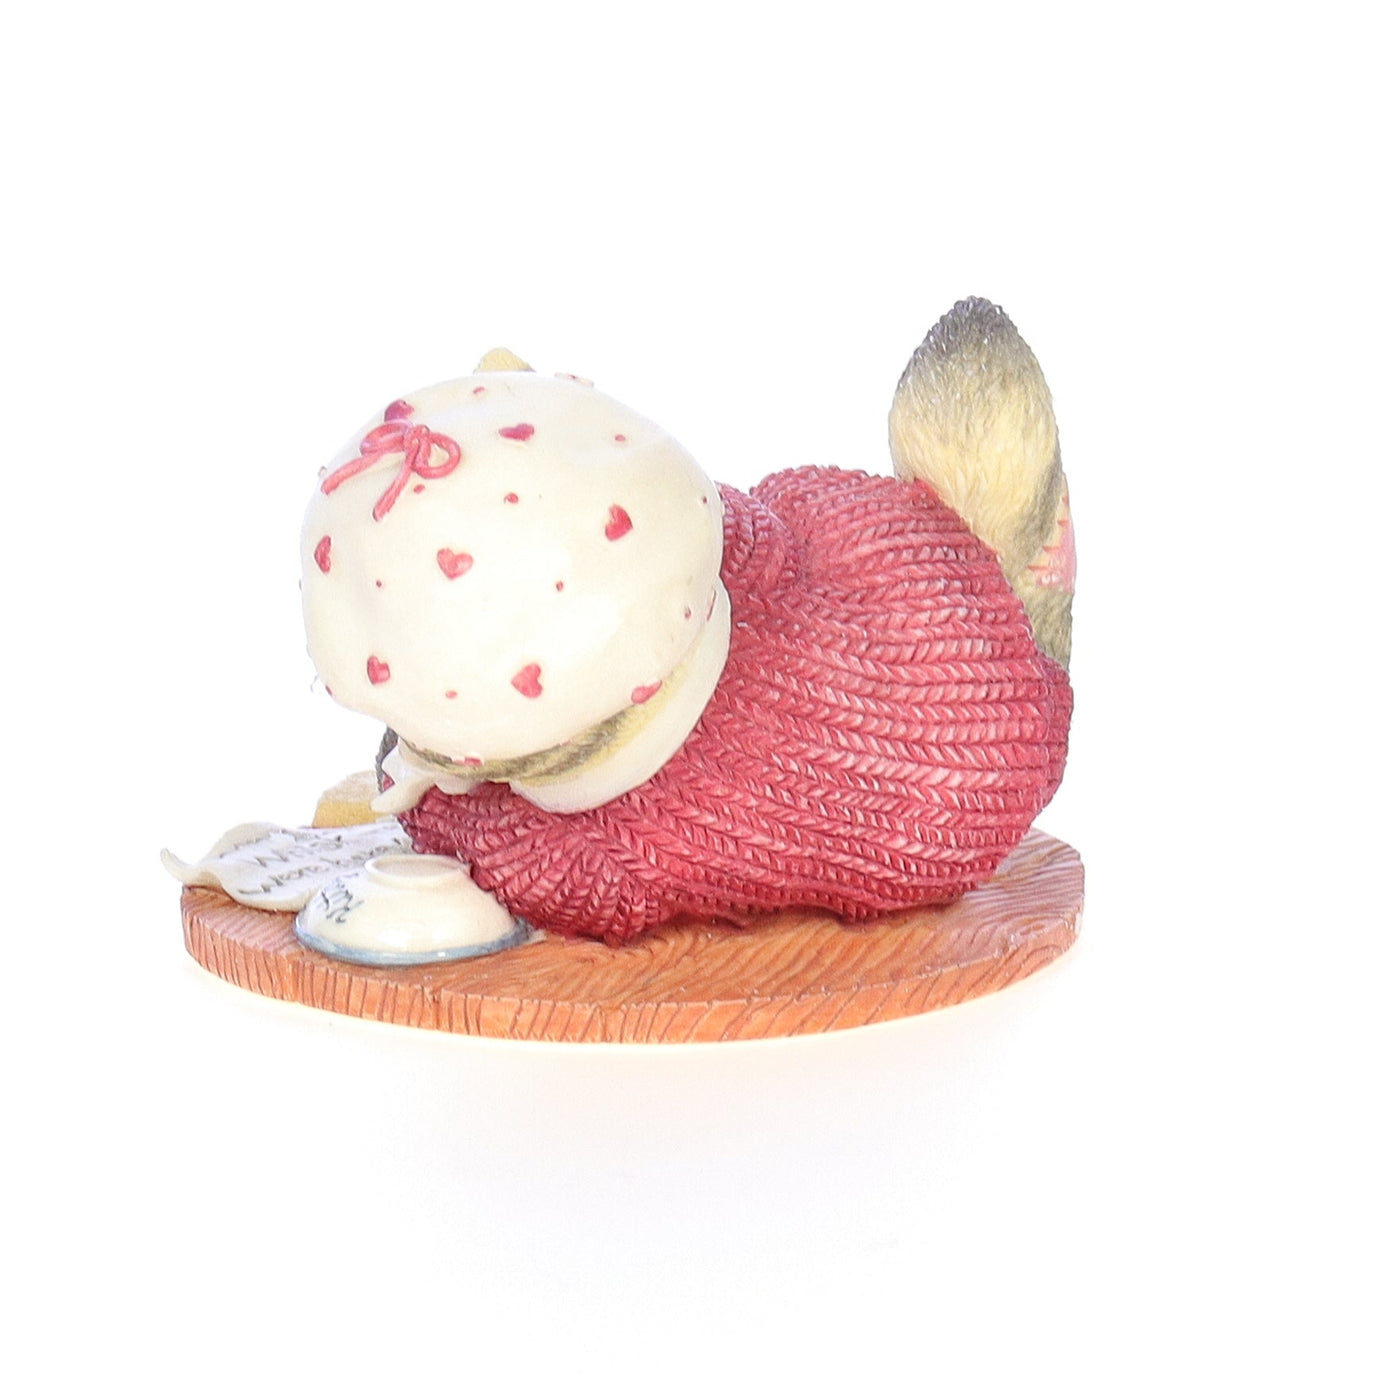 Calico_Kittens_Whisk-er_Were_Here_Valentines_Day_Figurine_1997